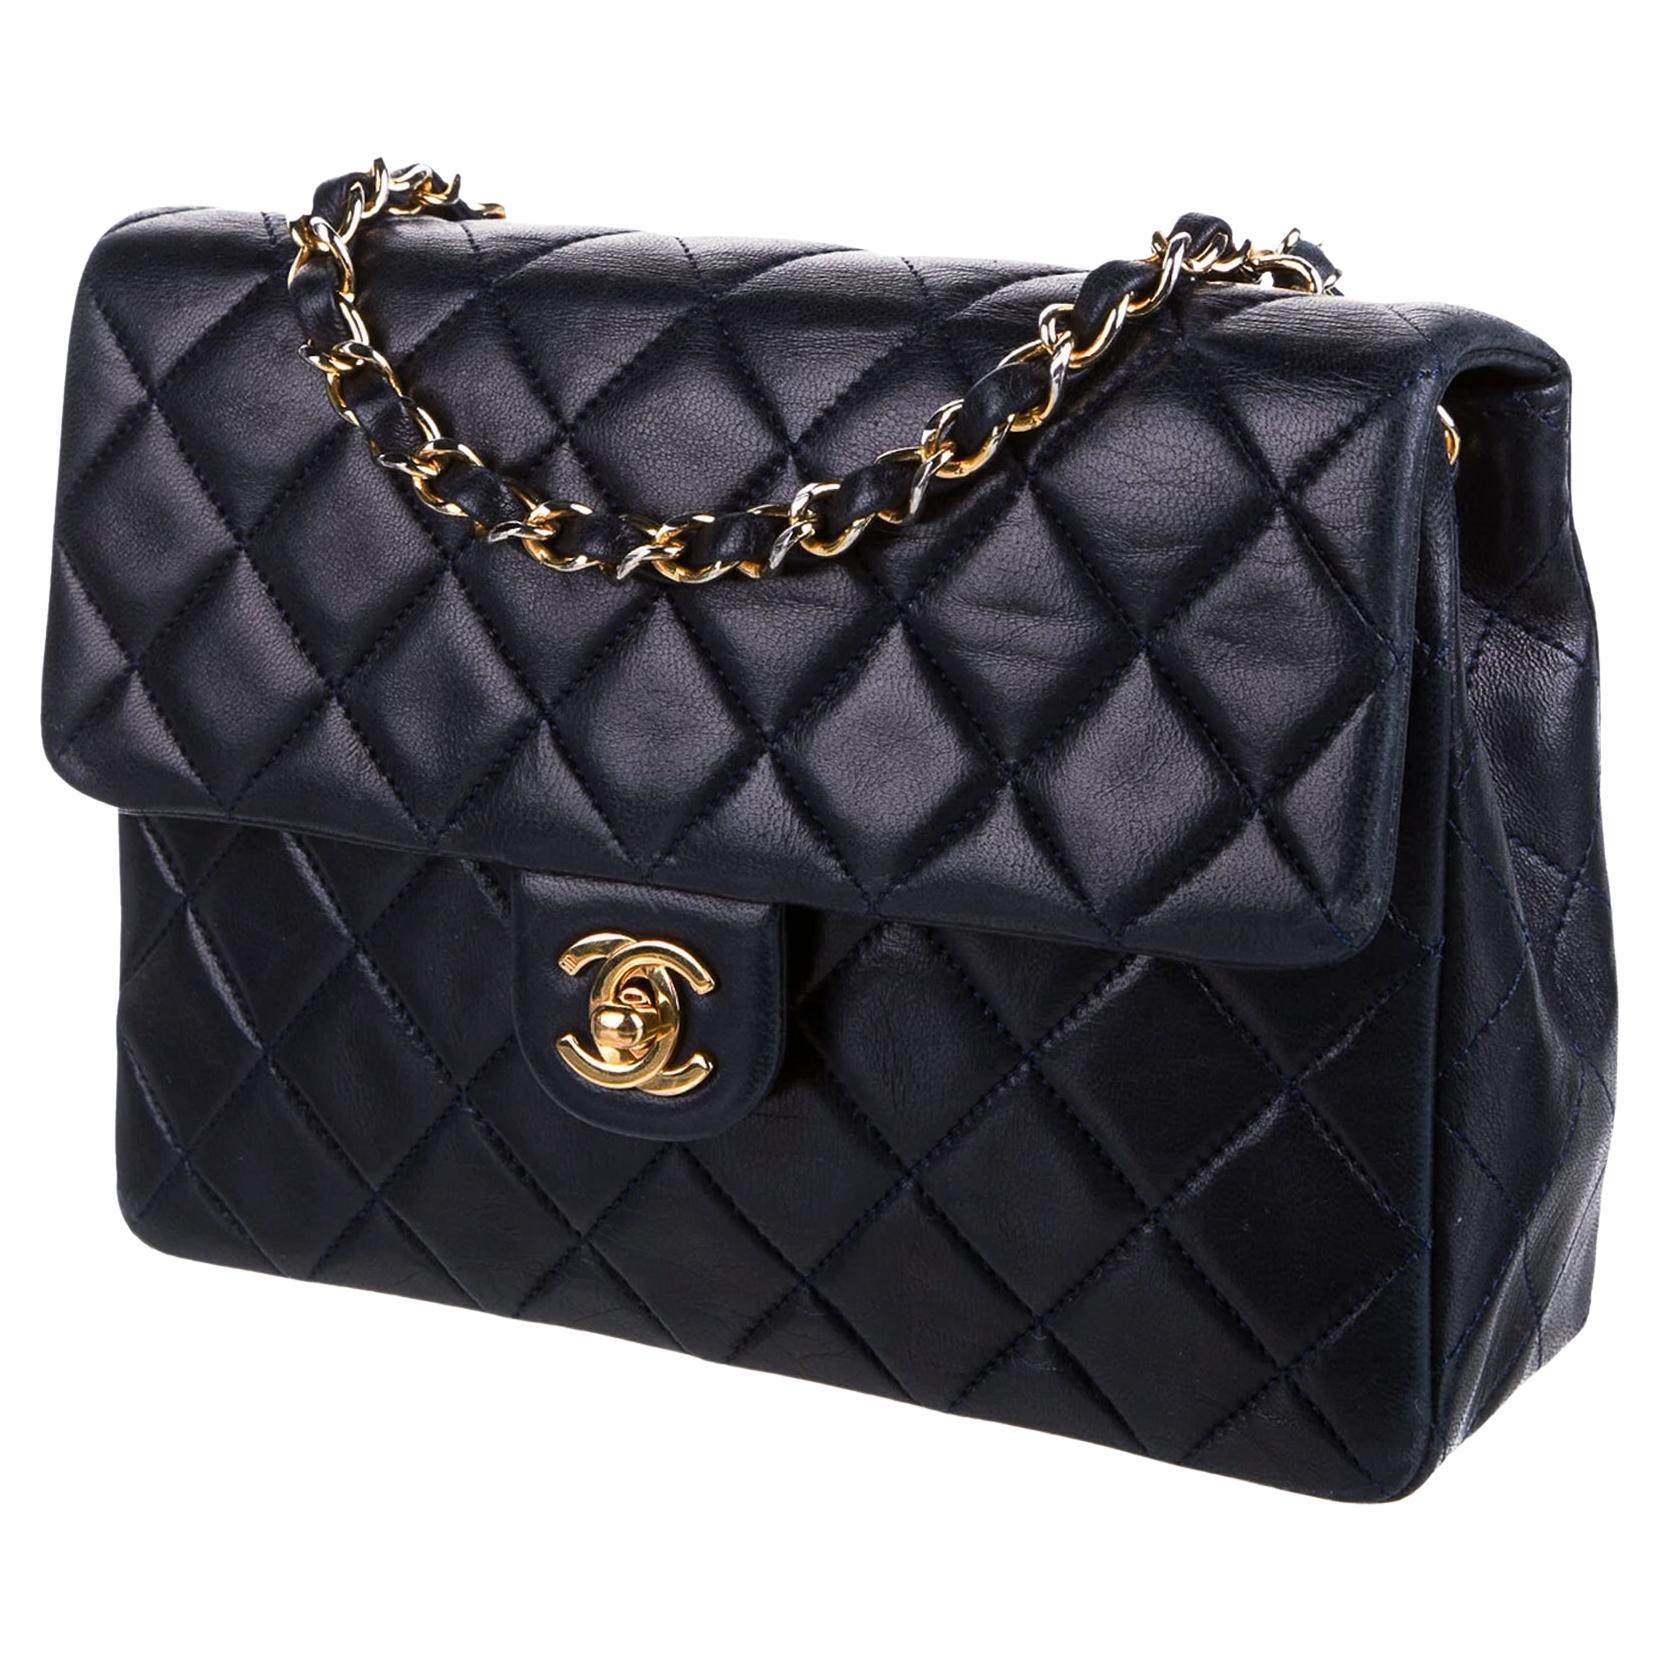 Chanel Navy Quilted Nylon Travel Bag With Long Strap 2015/16